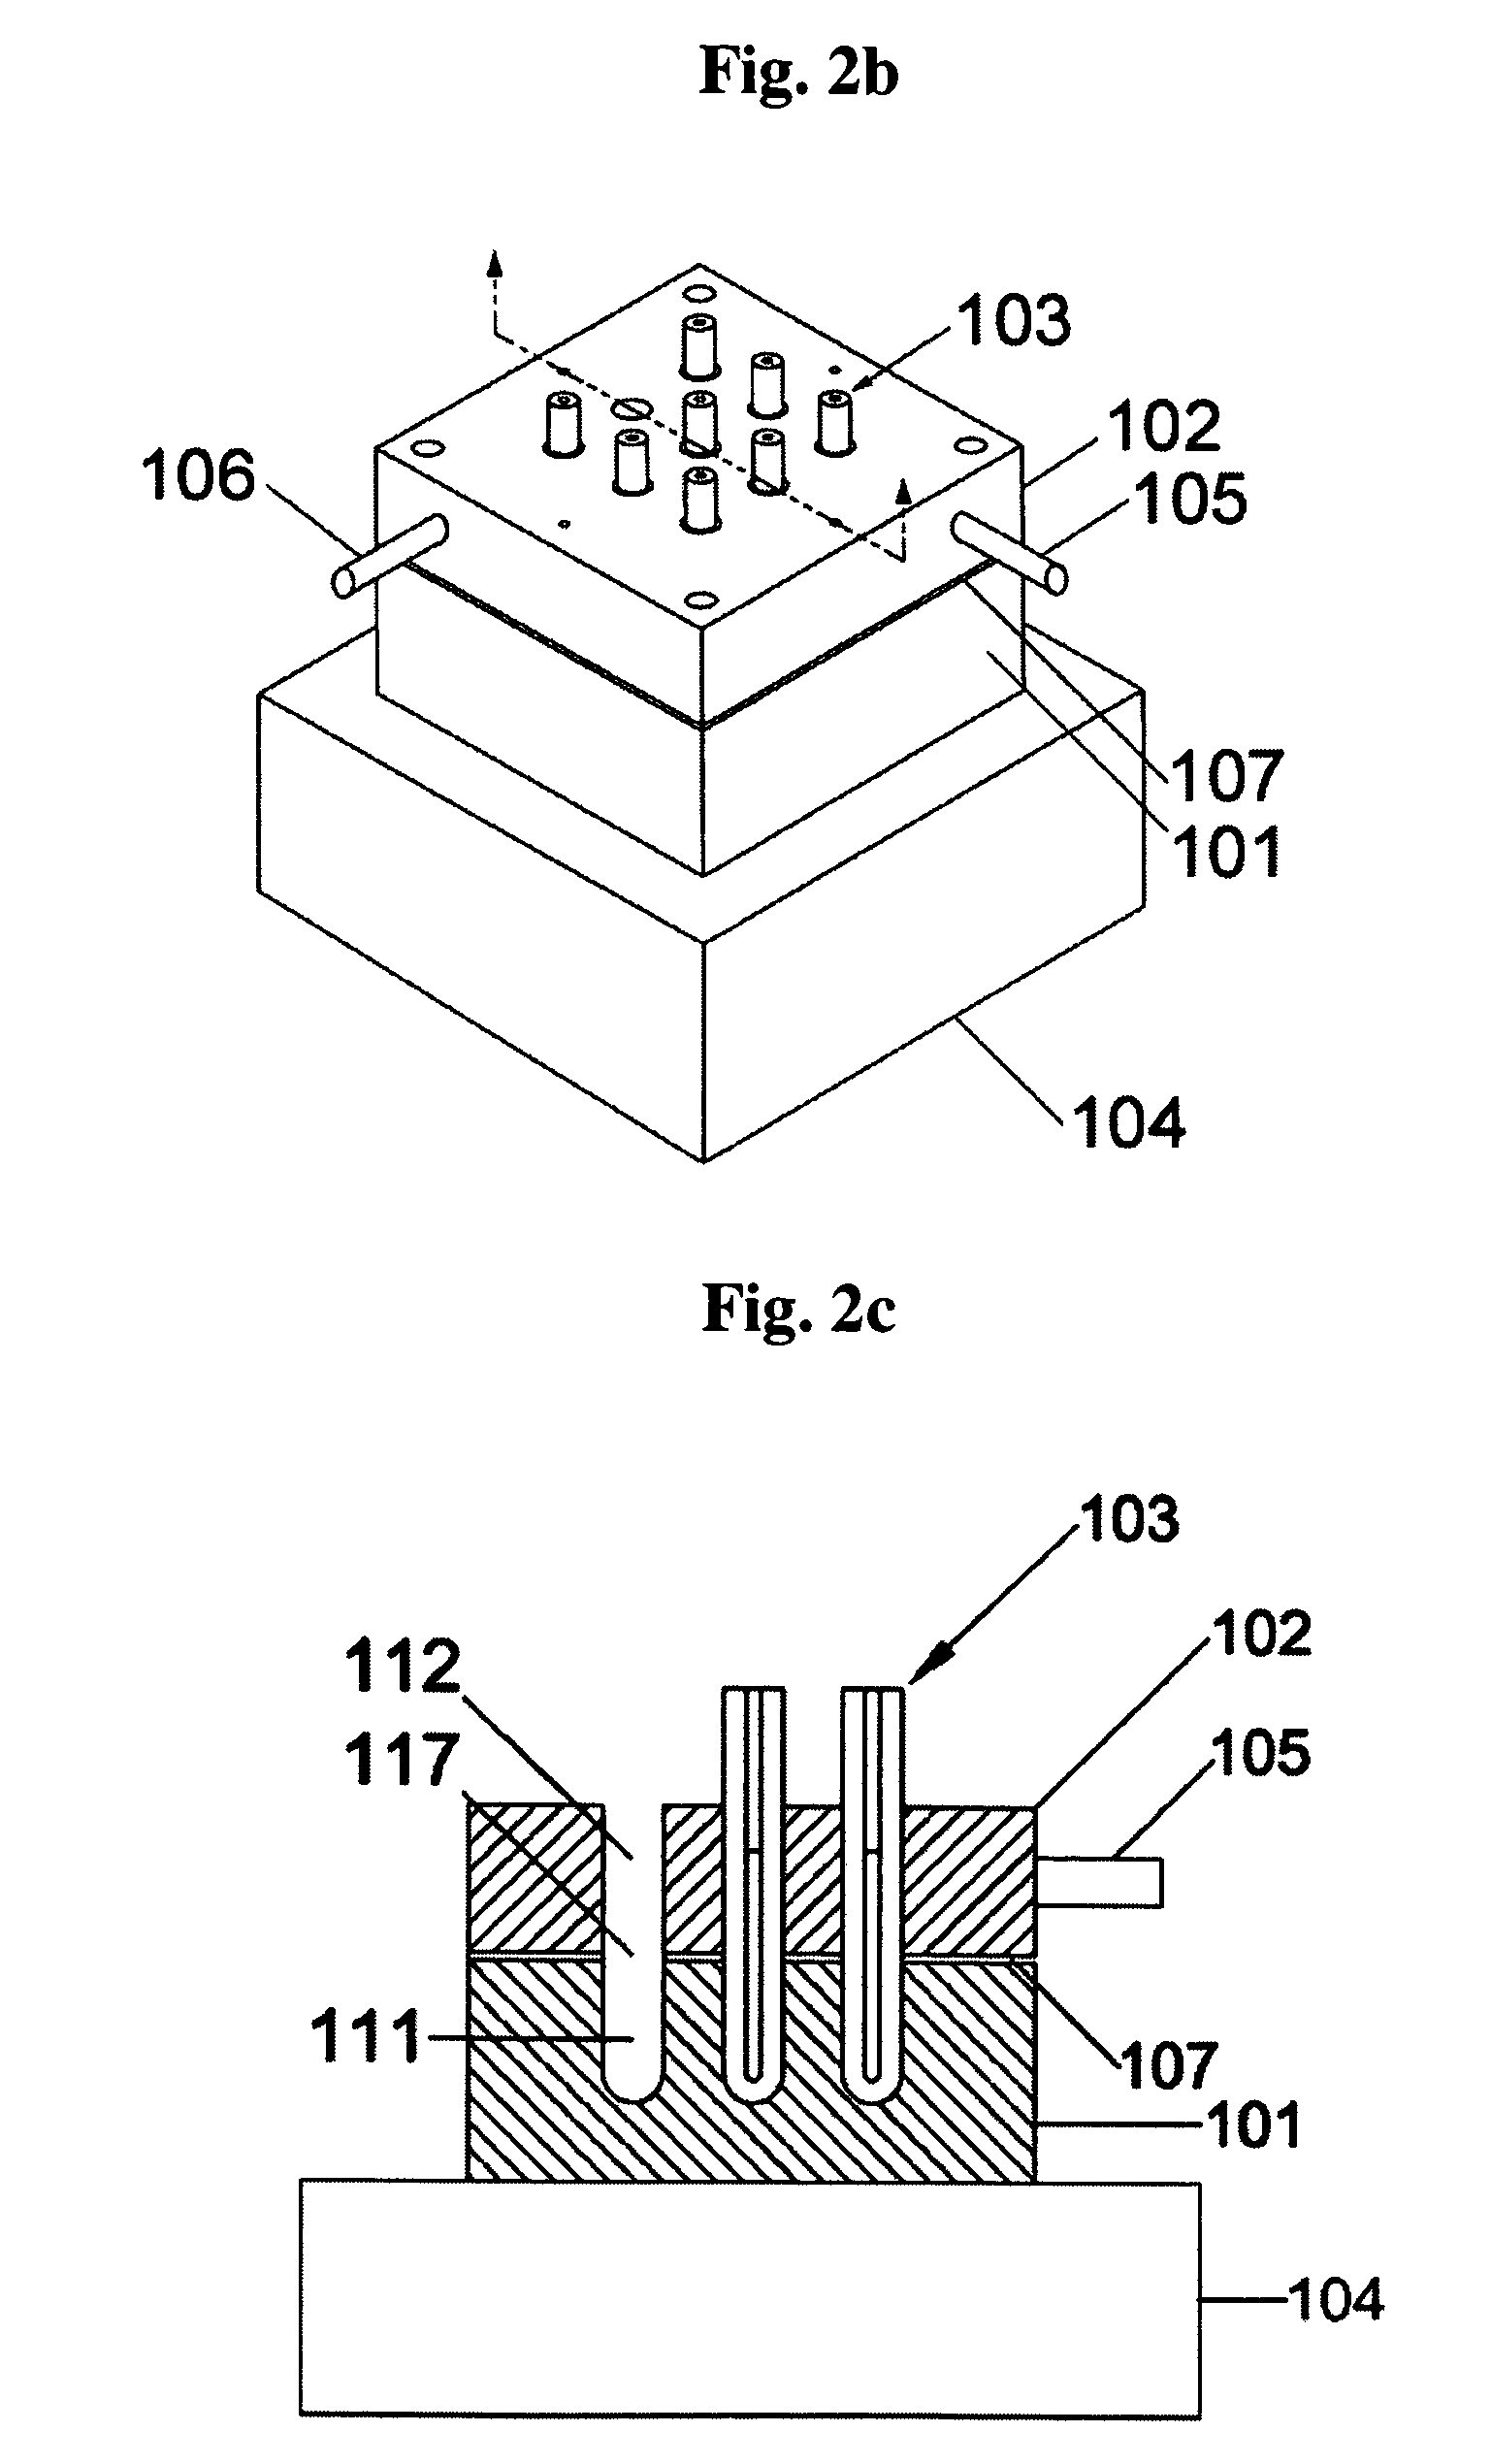 Method and apparatus for amplification of nucleic acid sequences using immobilized DNA polymerase